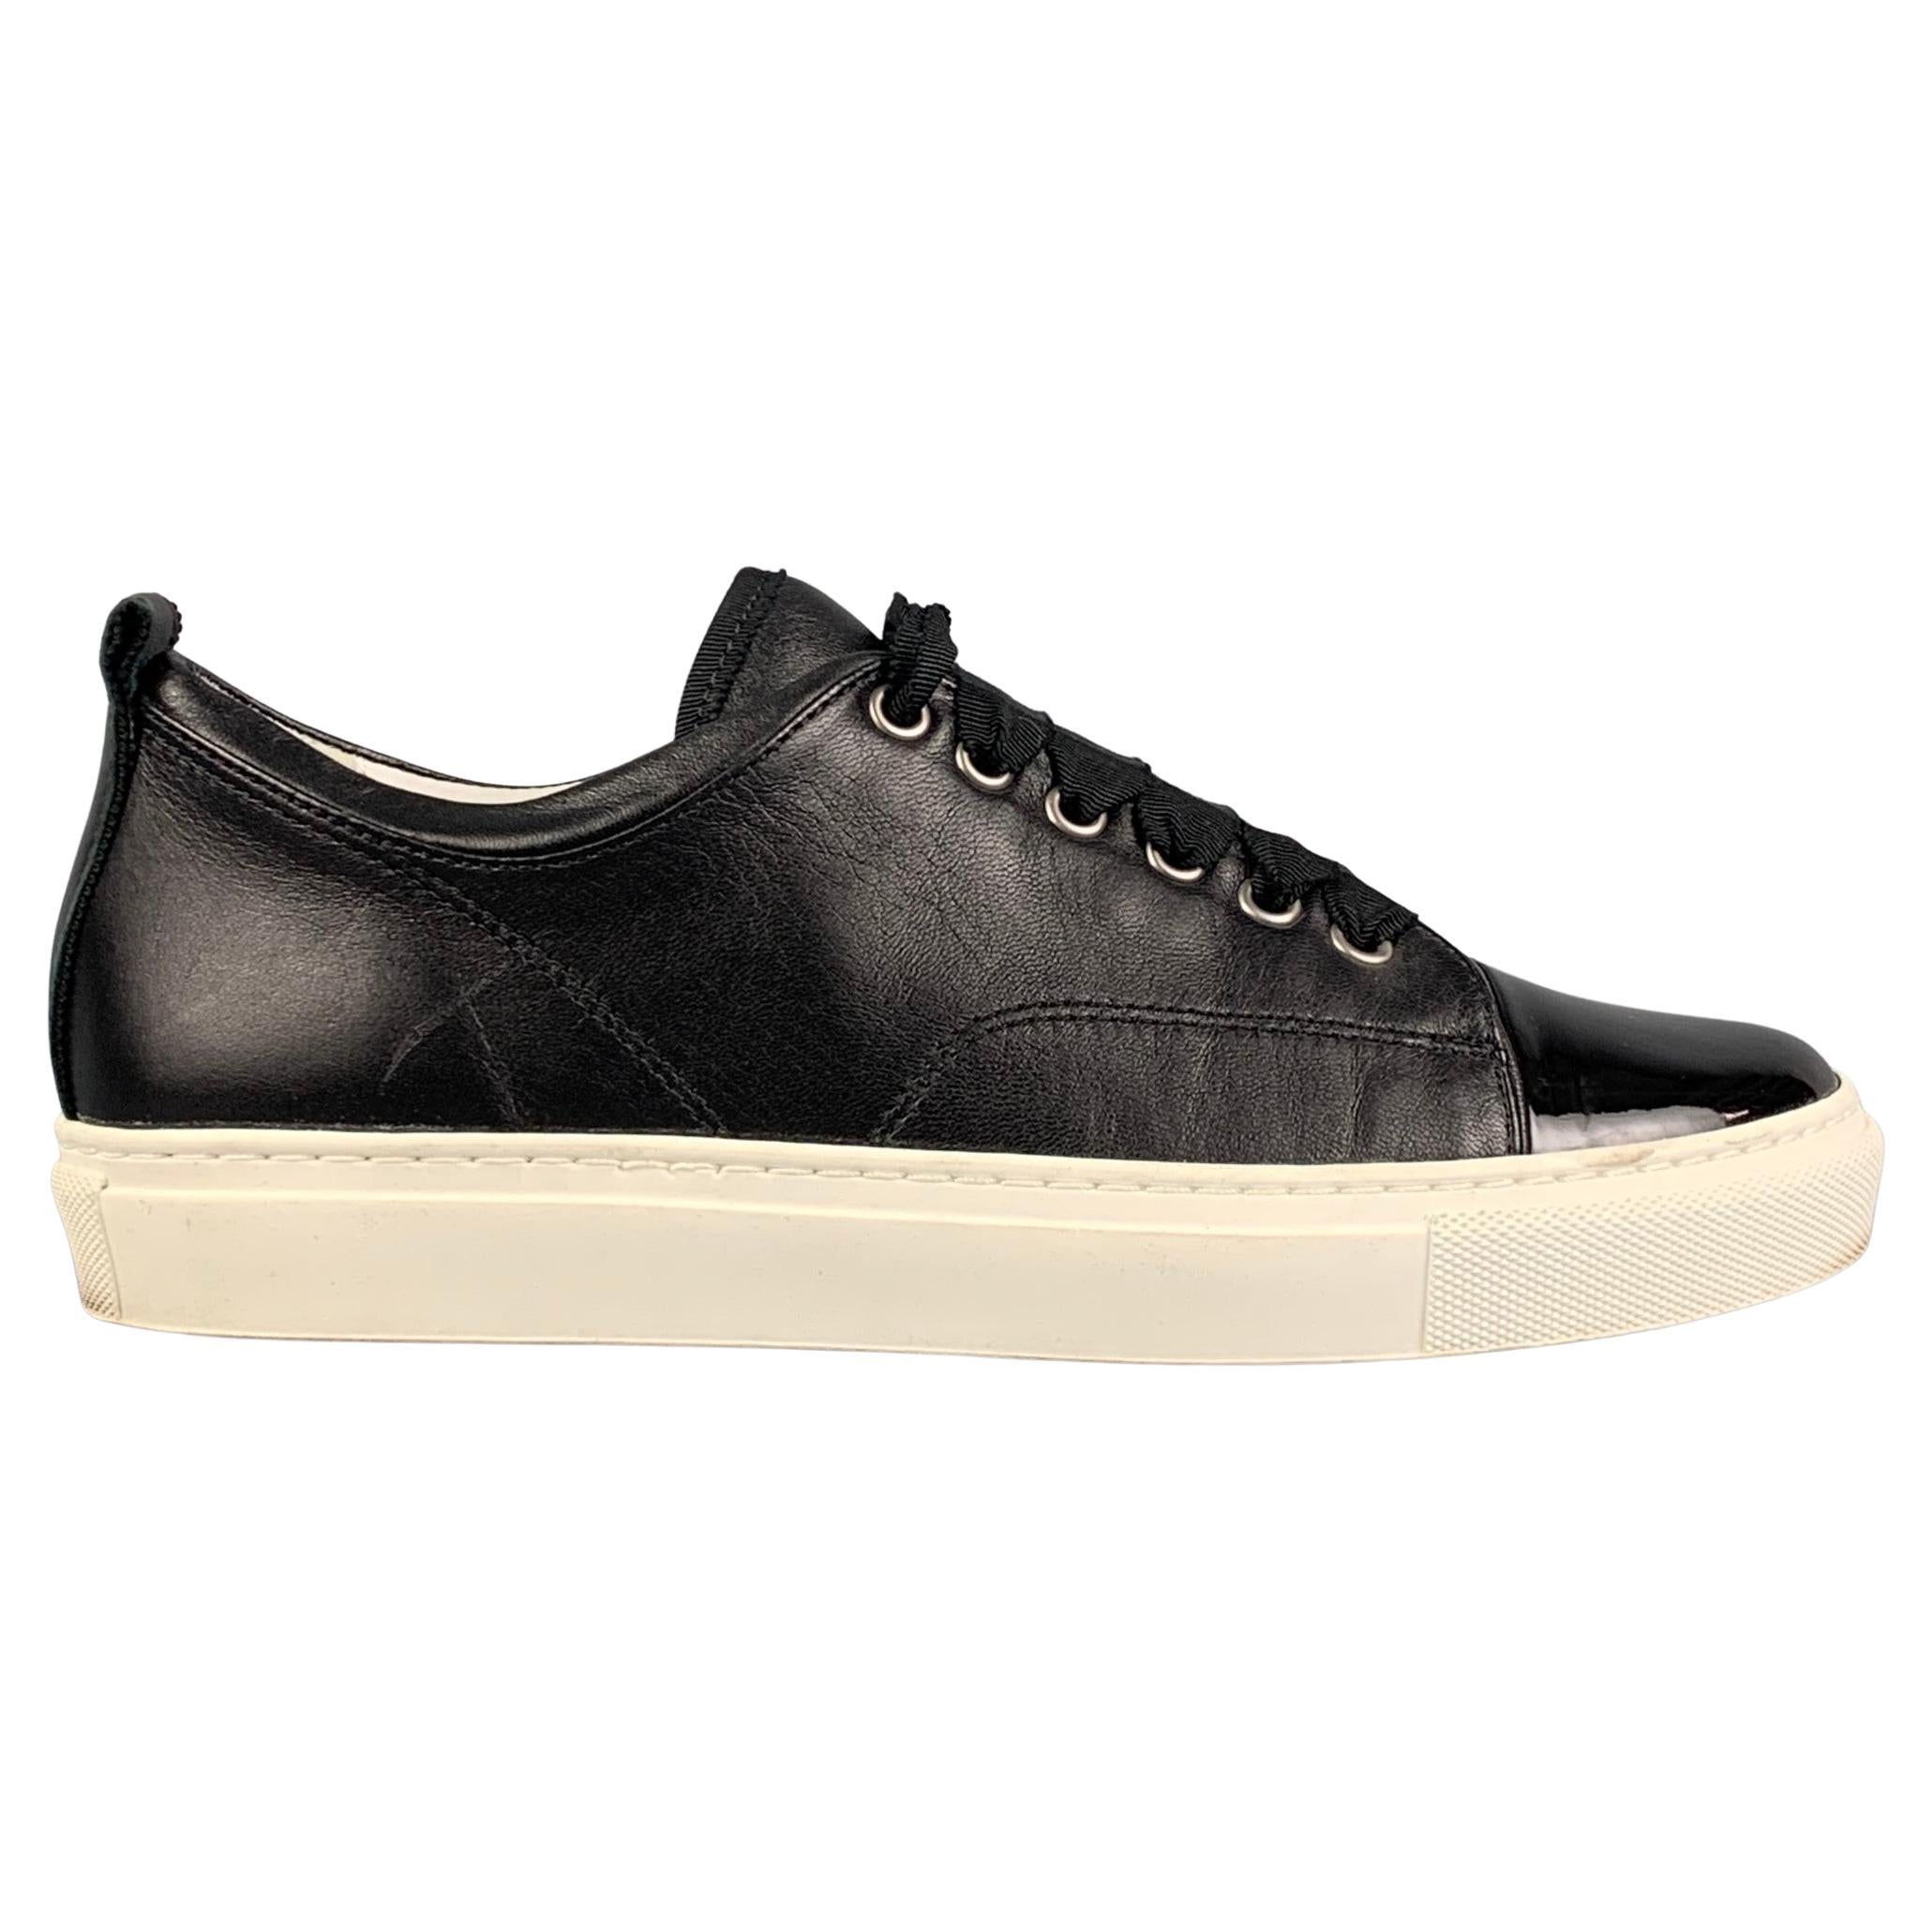 LANVIN Size 7.5 Black Leather Lace Up Sneakers